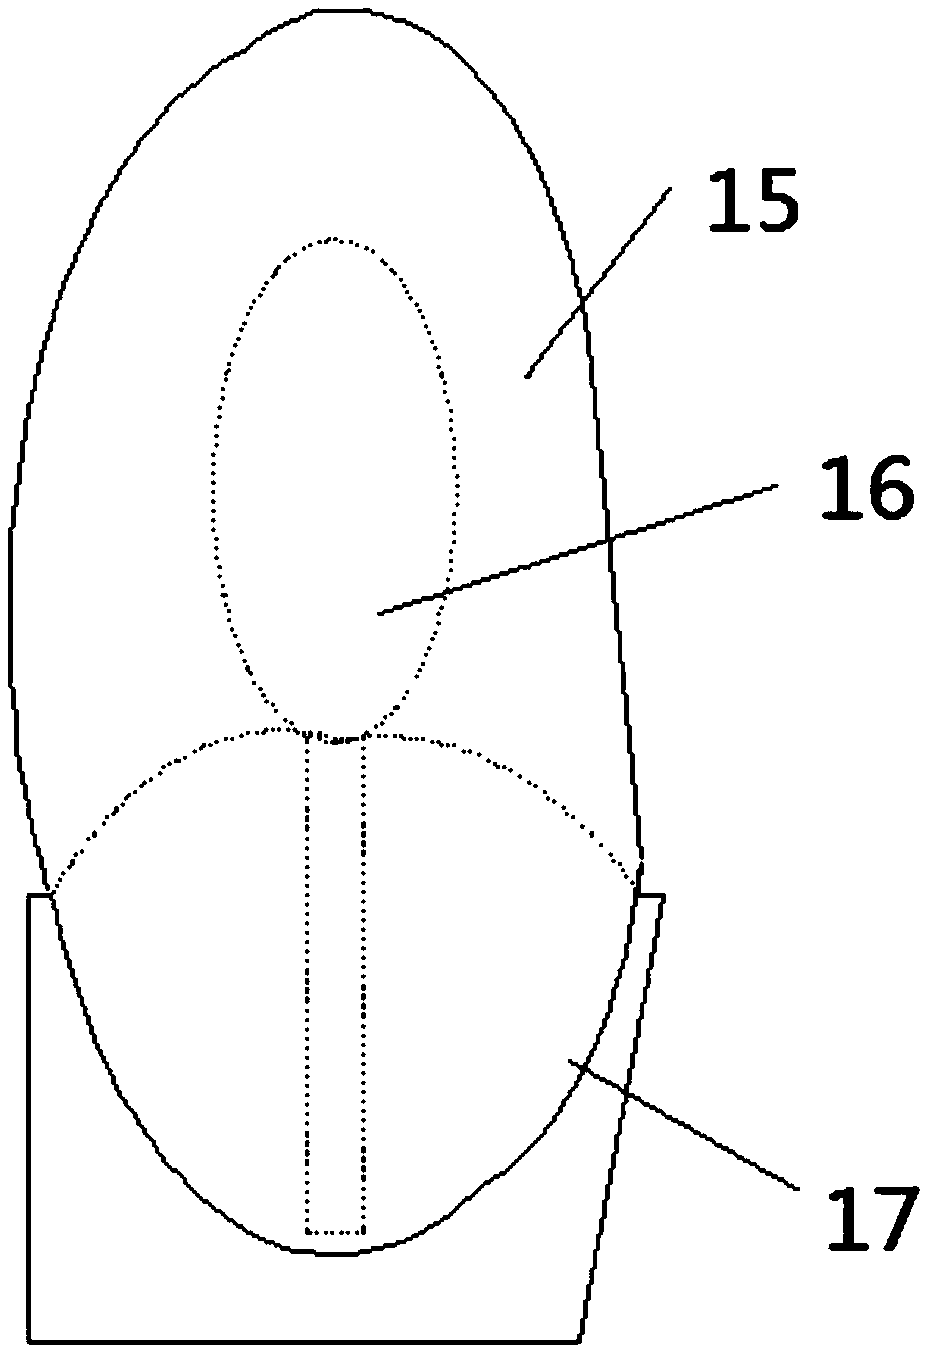 Mountain fruit tree planting system and method